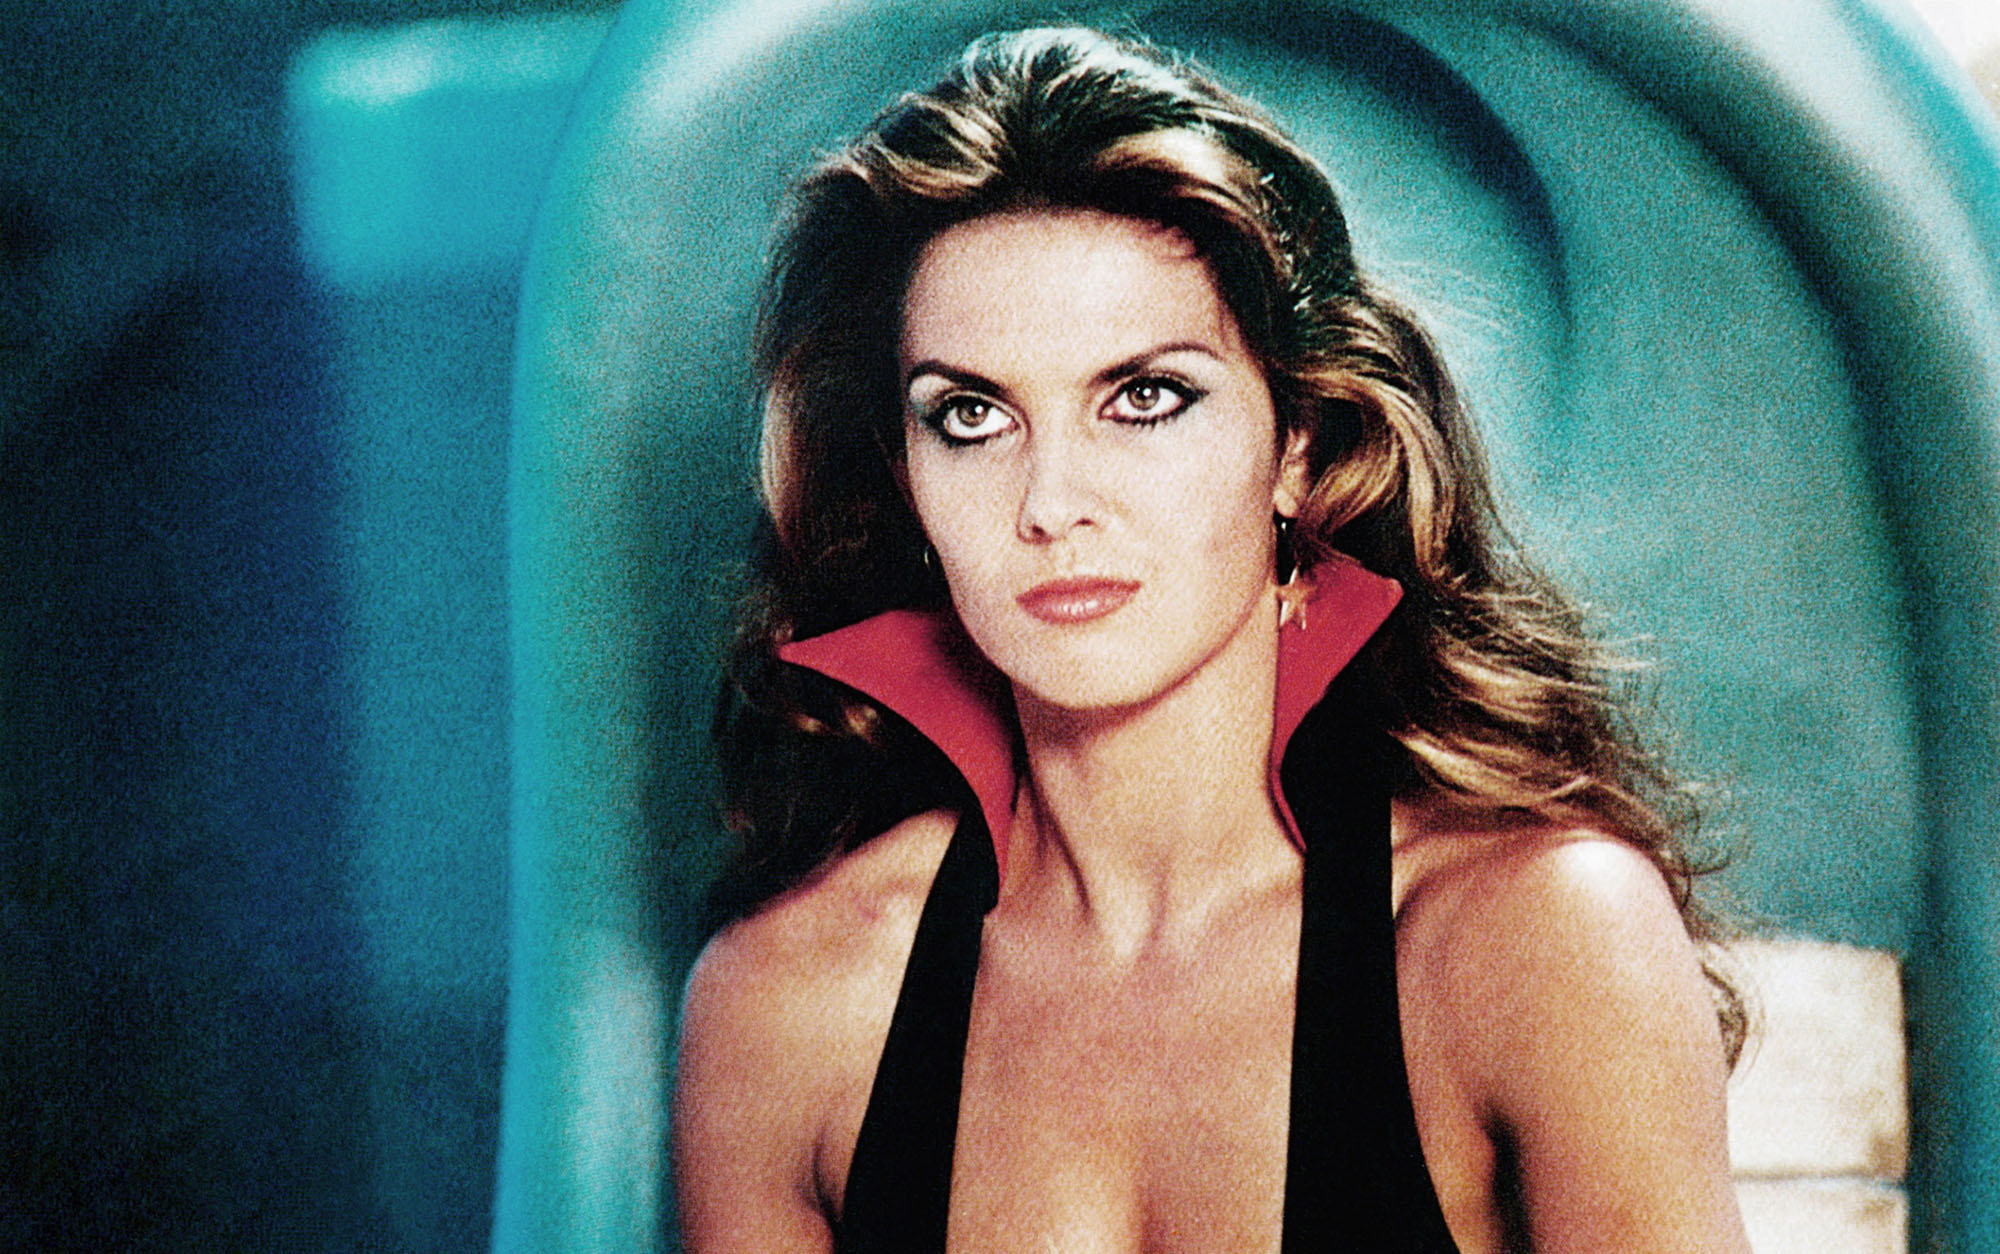 image from the 1979 space opera movie "Starcrash." It is a medium headshot of Caroline Munro as Stella Star, a space smuggler. She is wearing a low-cut shirt with a pointed collar.